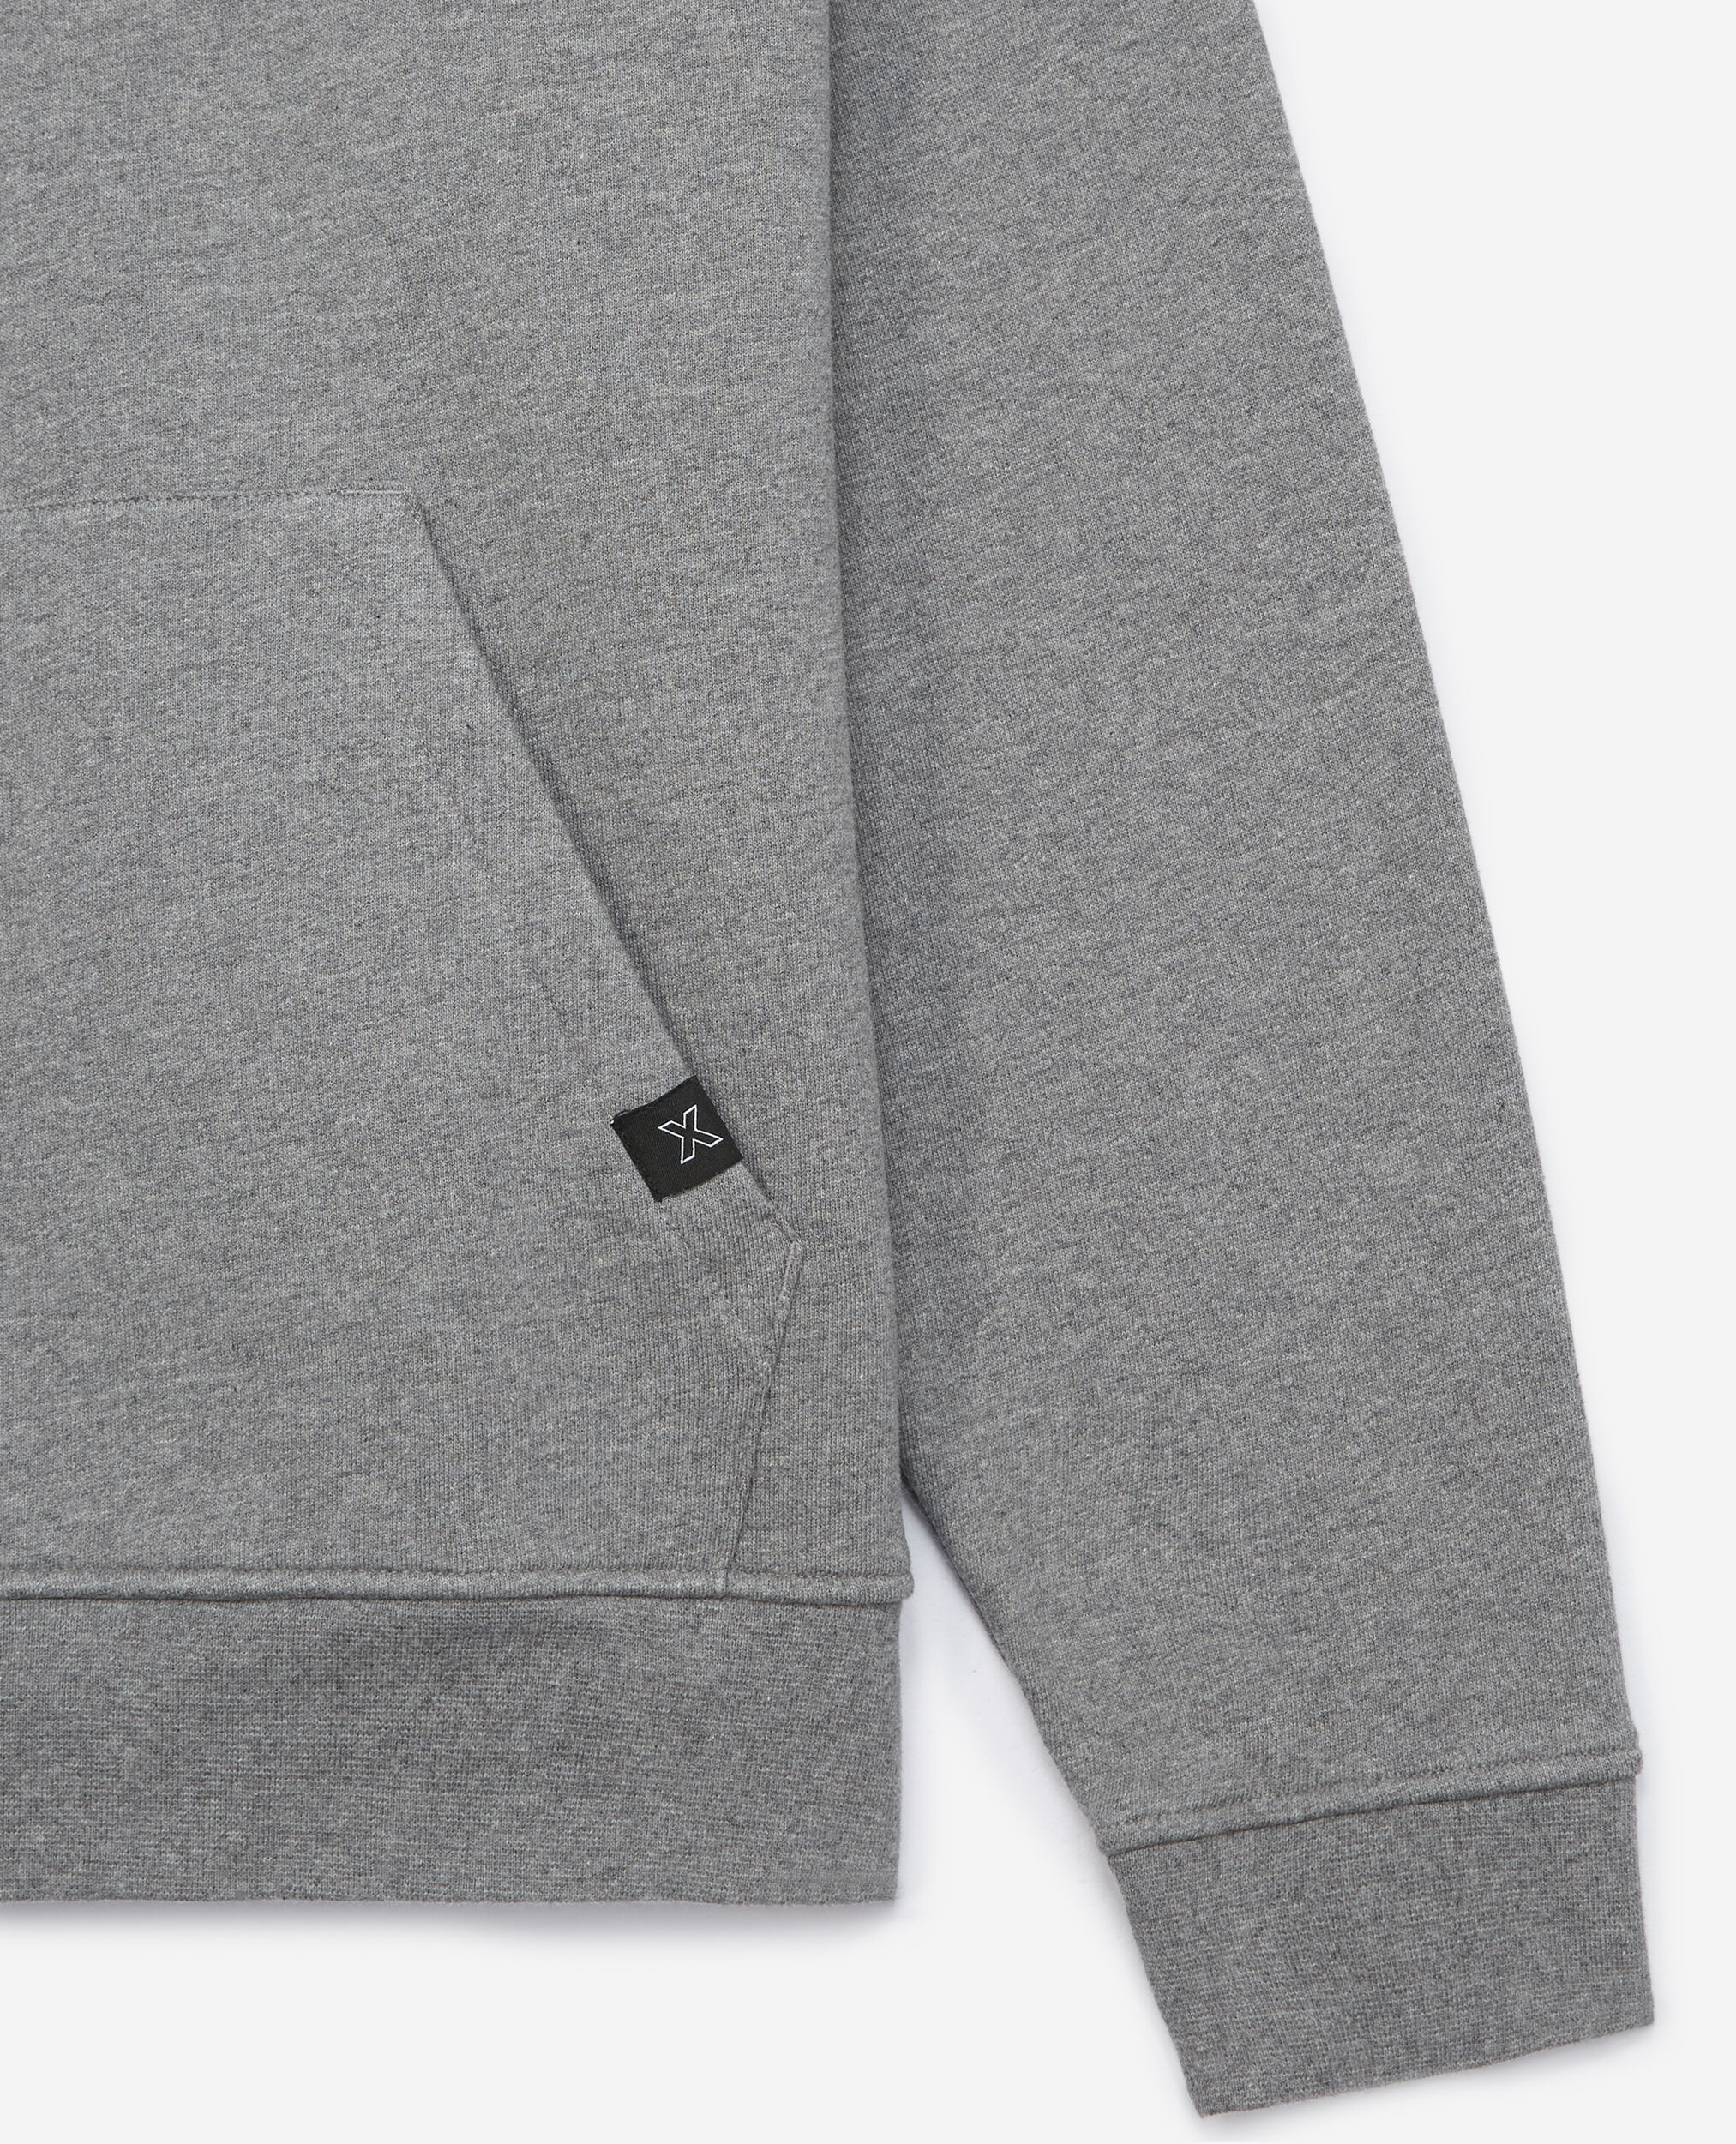 Flecked gray hoodie in cotton with logo, GREY MELANGE, hi-res image number null